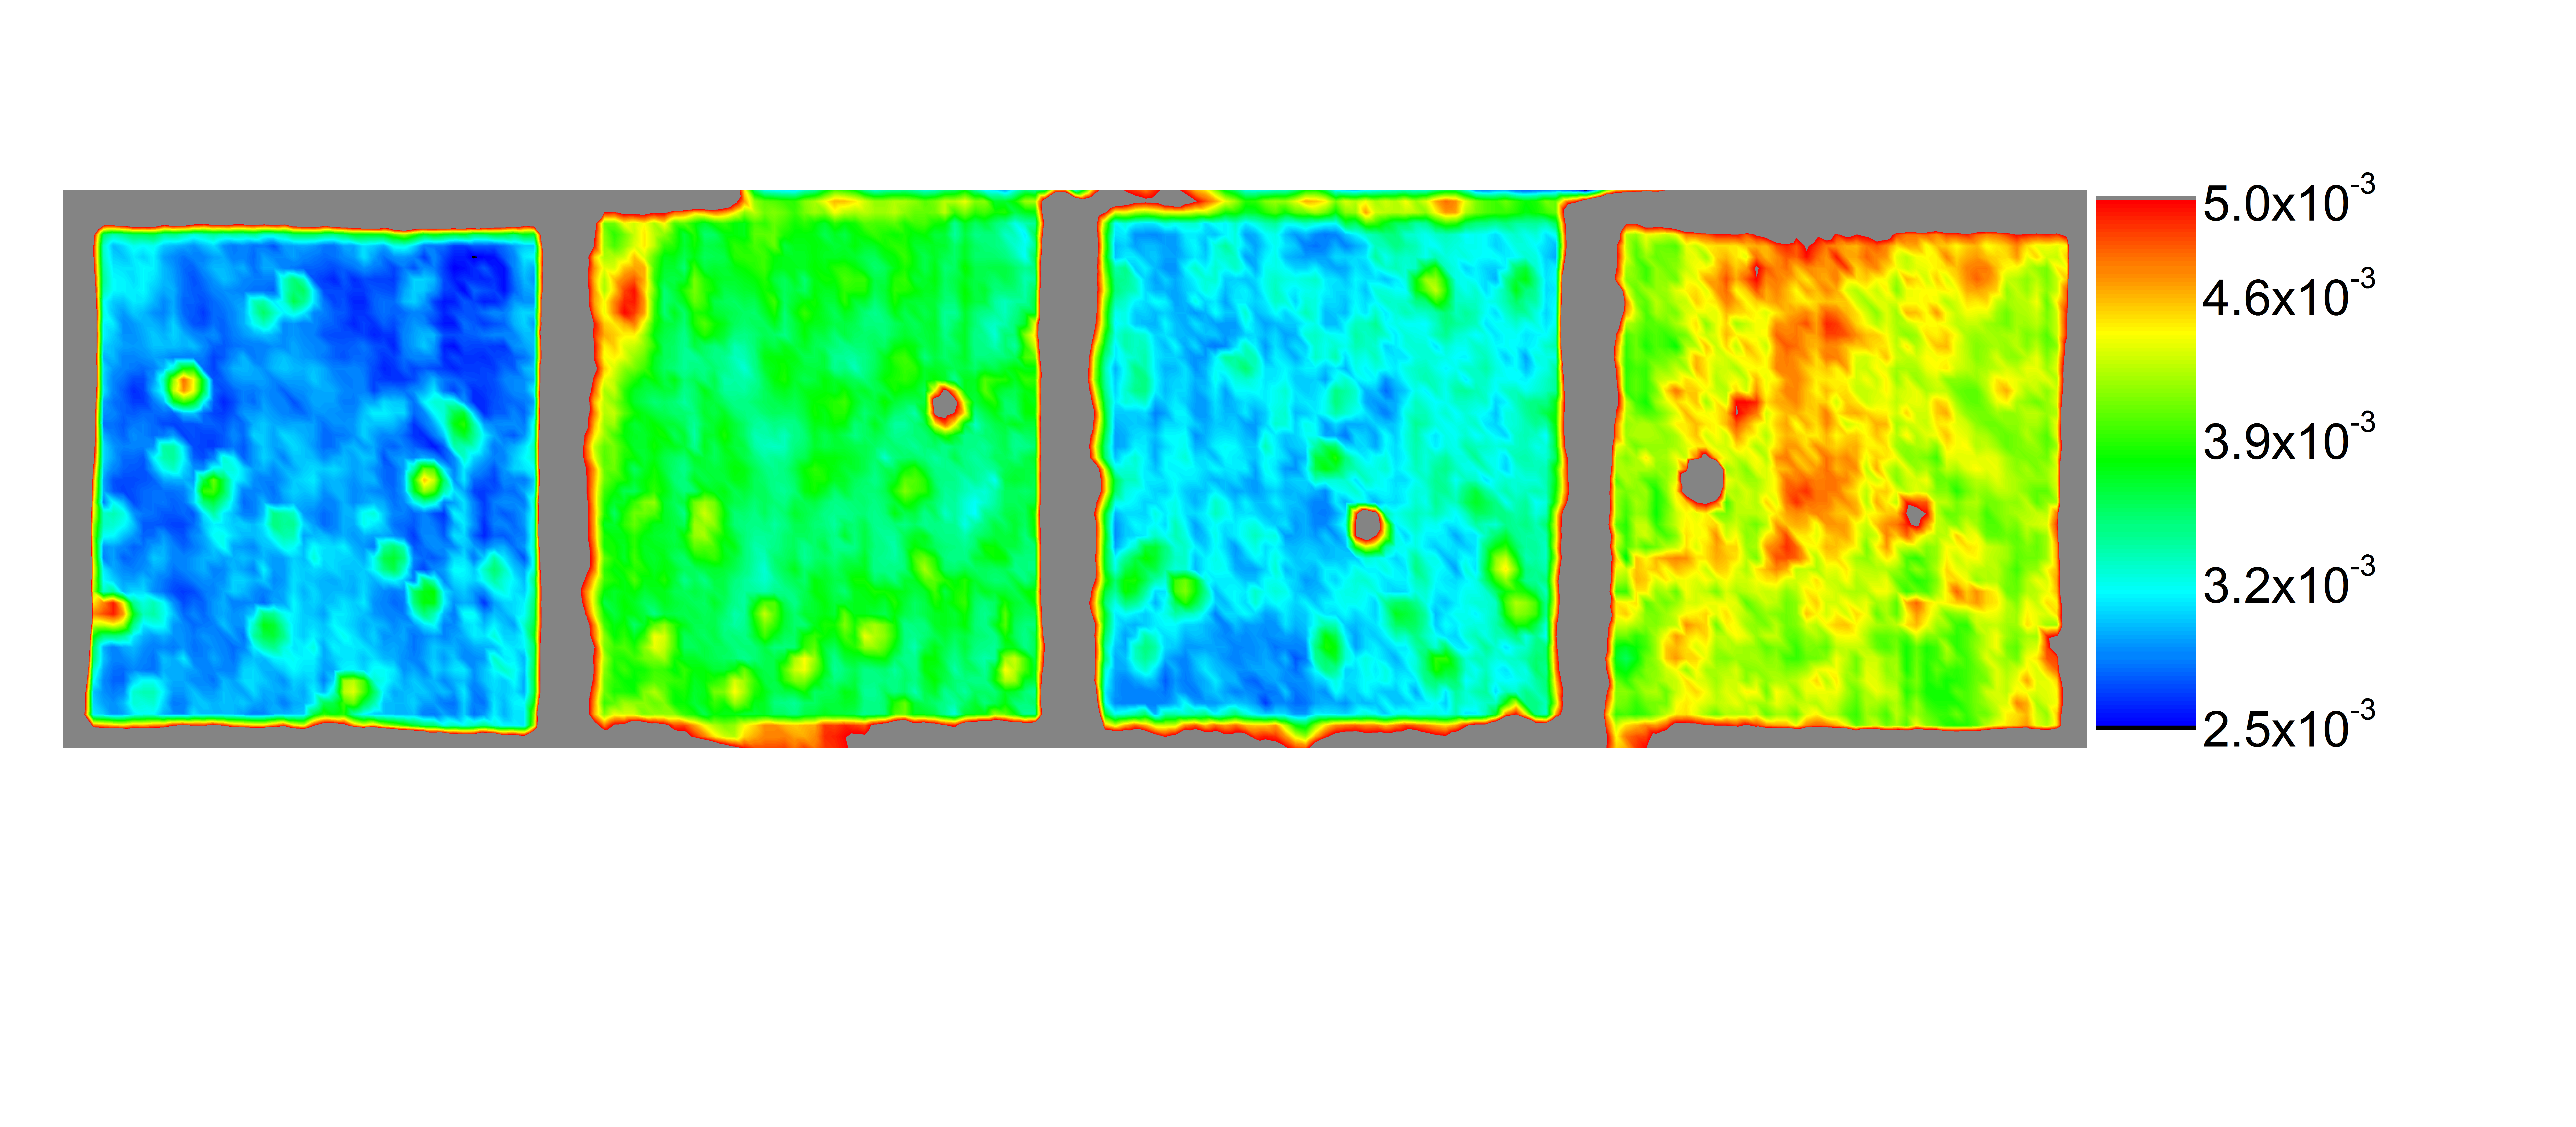 Mapping of scattering loss shows defects and homogeneity of holographic gratings (each 25 mm x 25 mm).